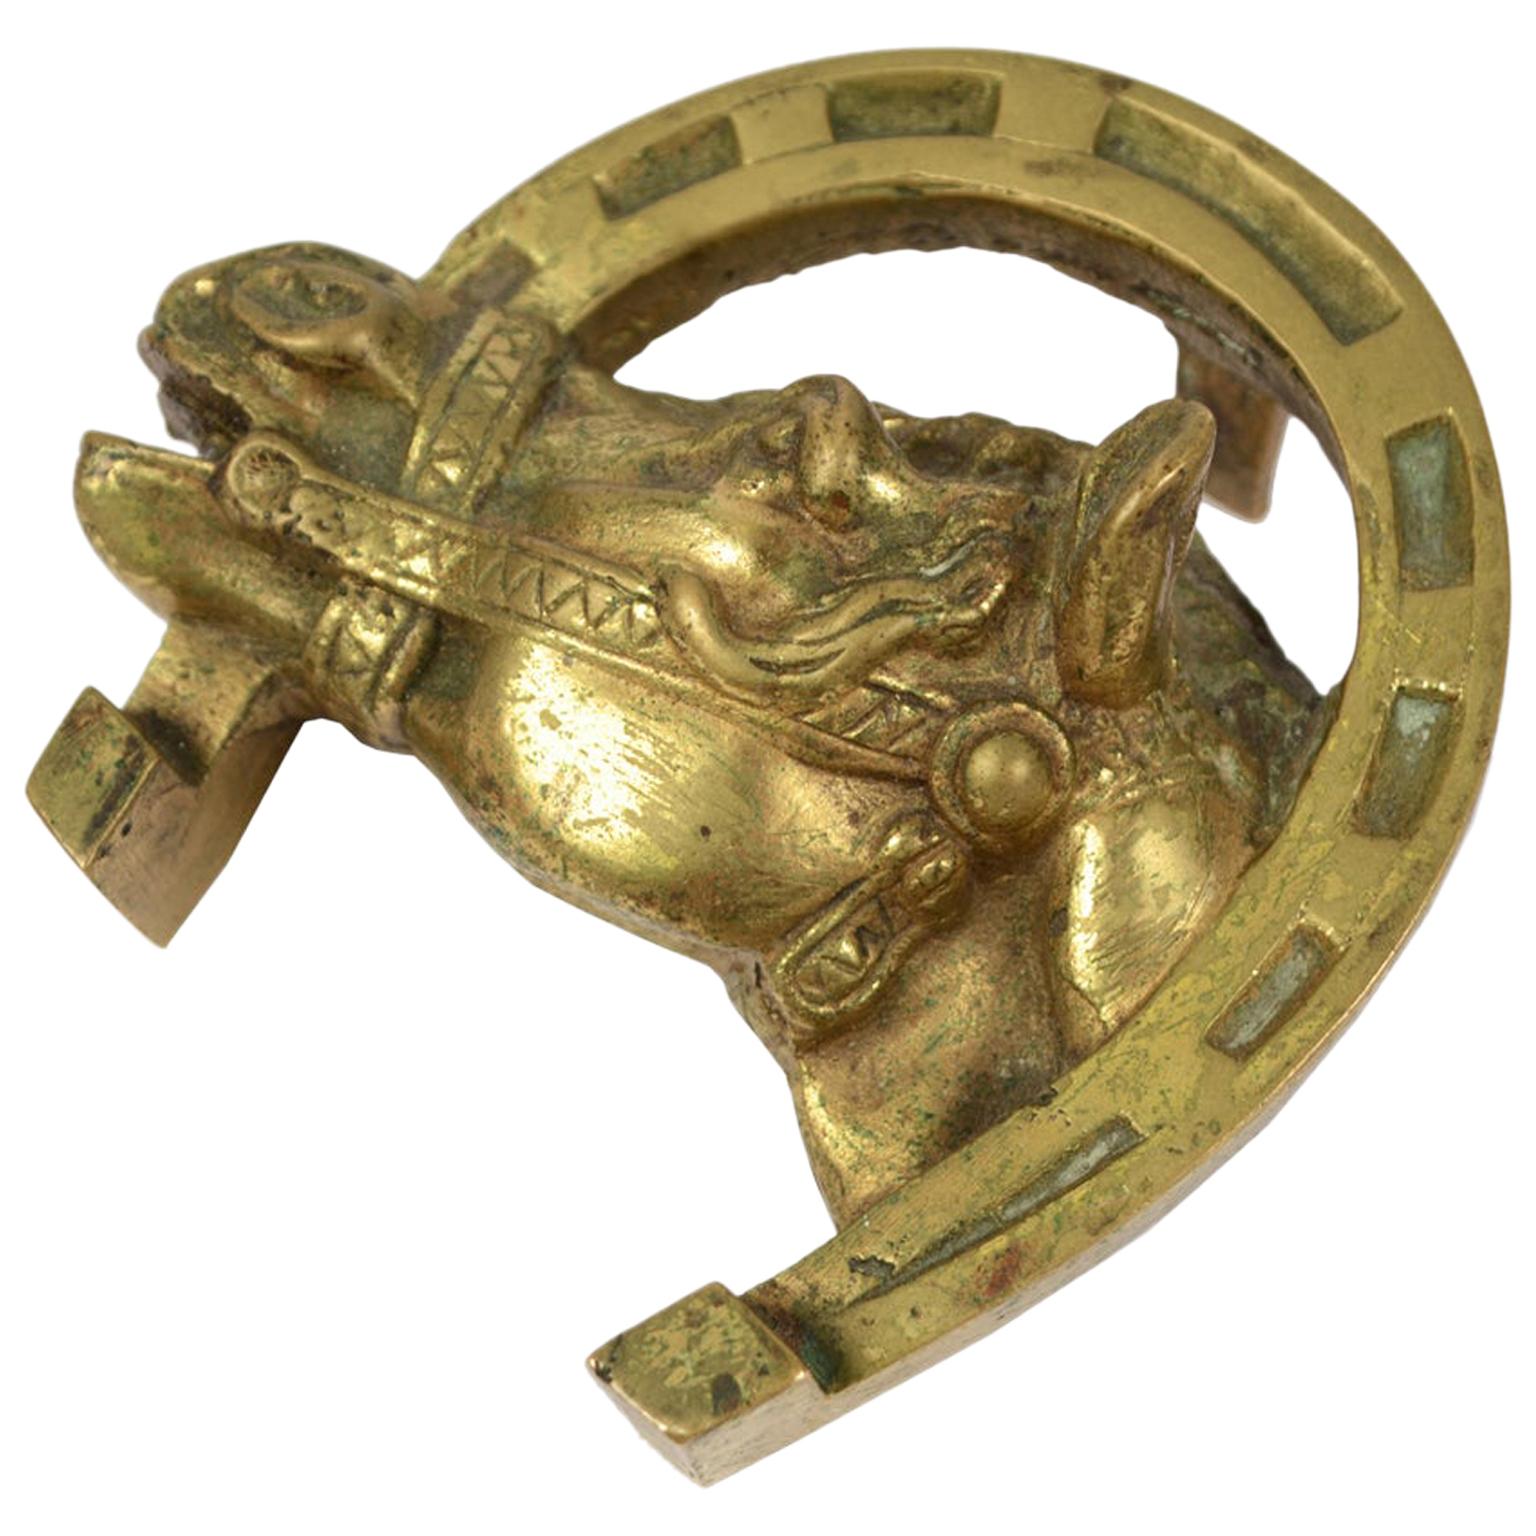 Antique Brass Paperweight Depicting a Horse's Head, 1930s